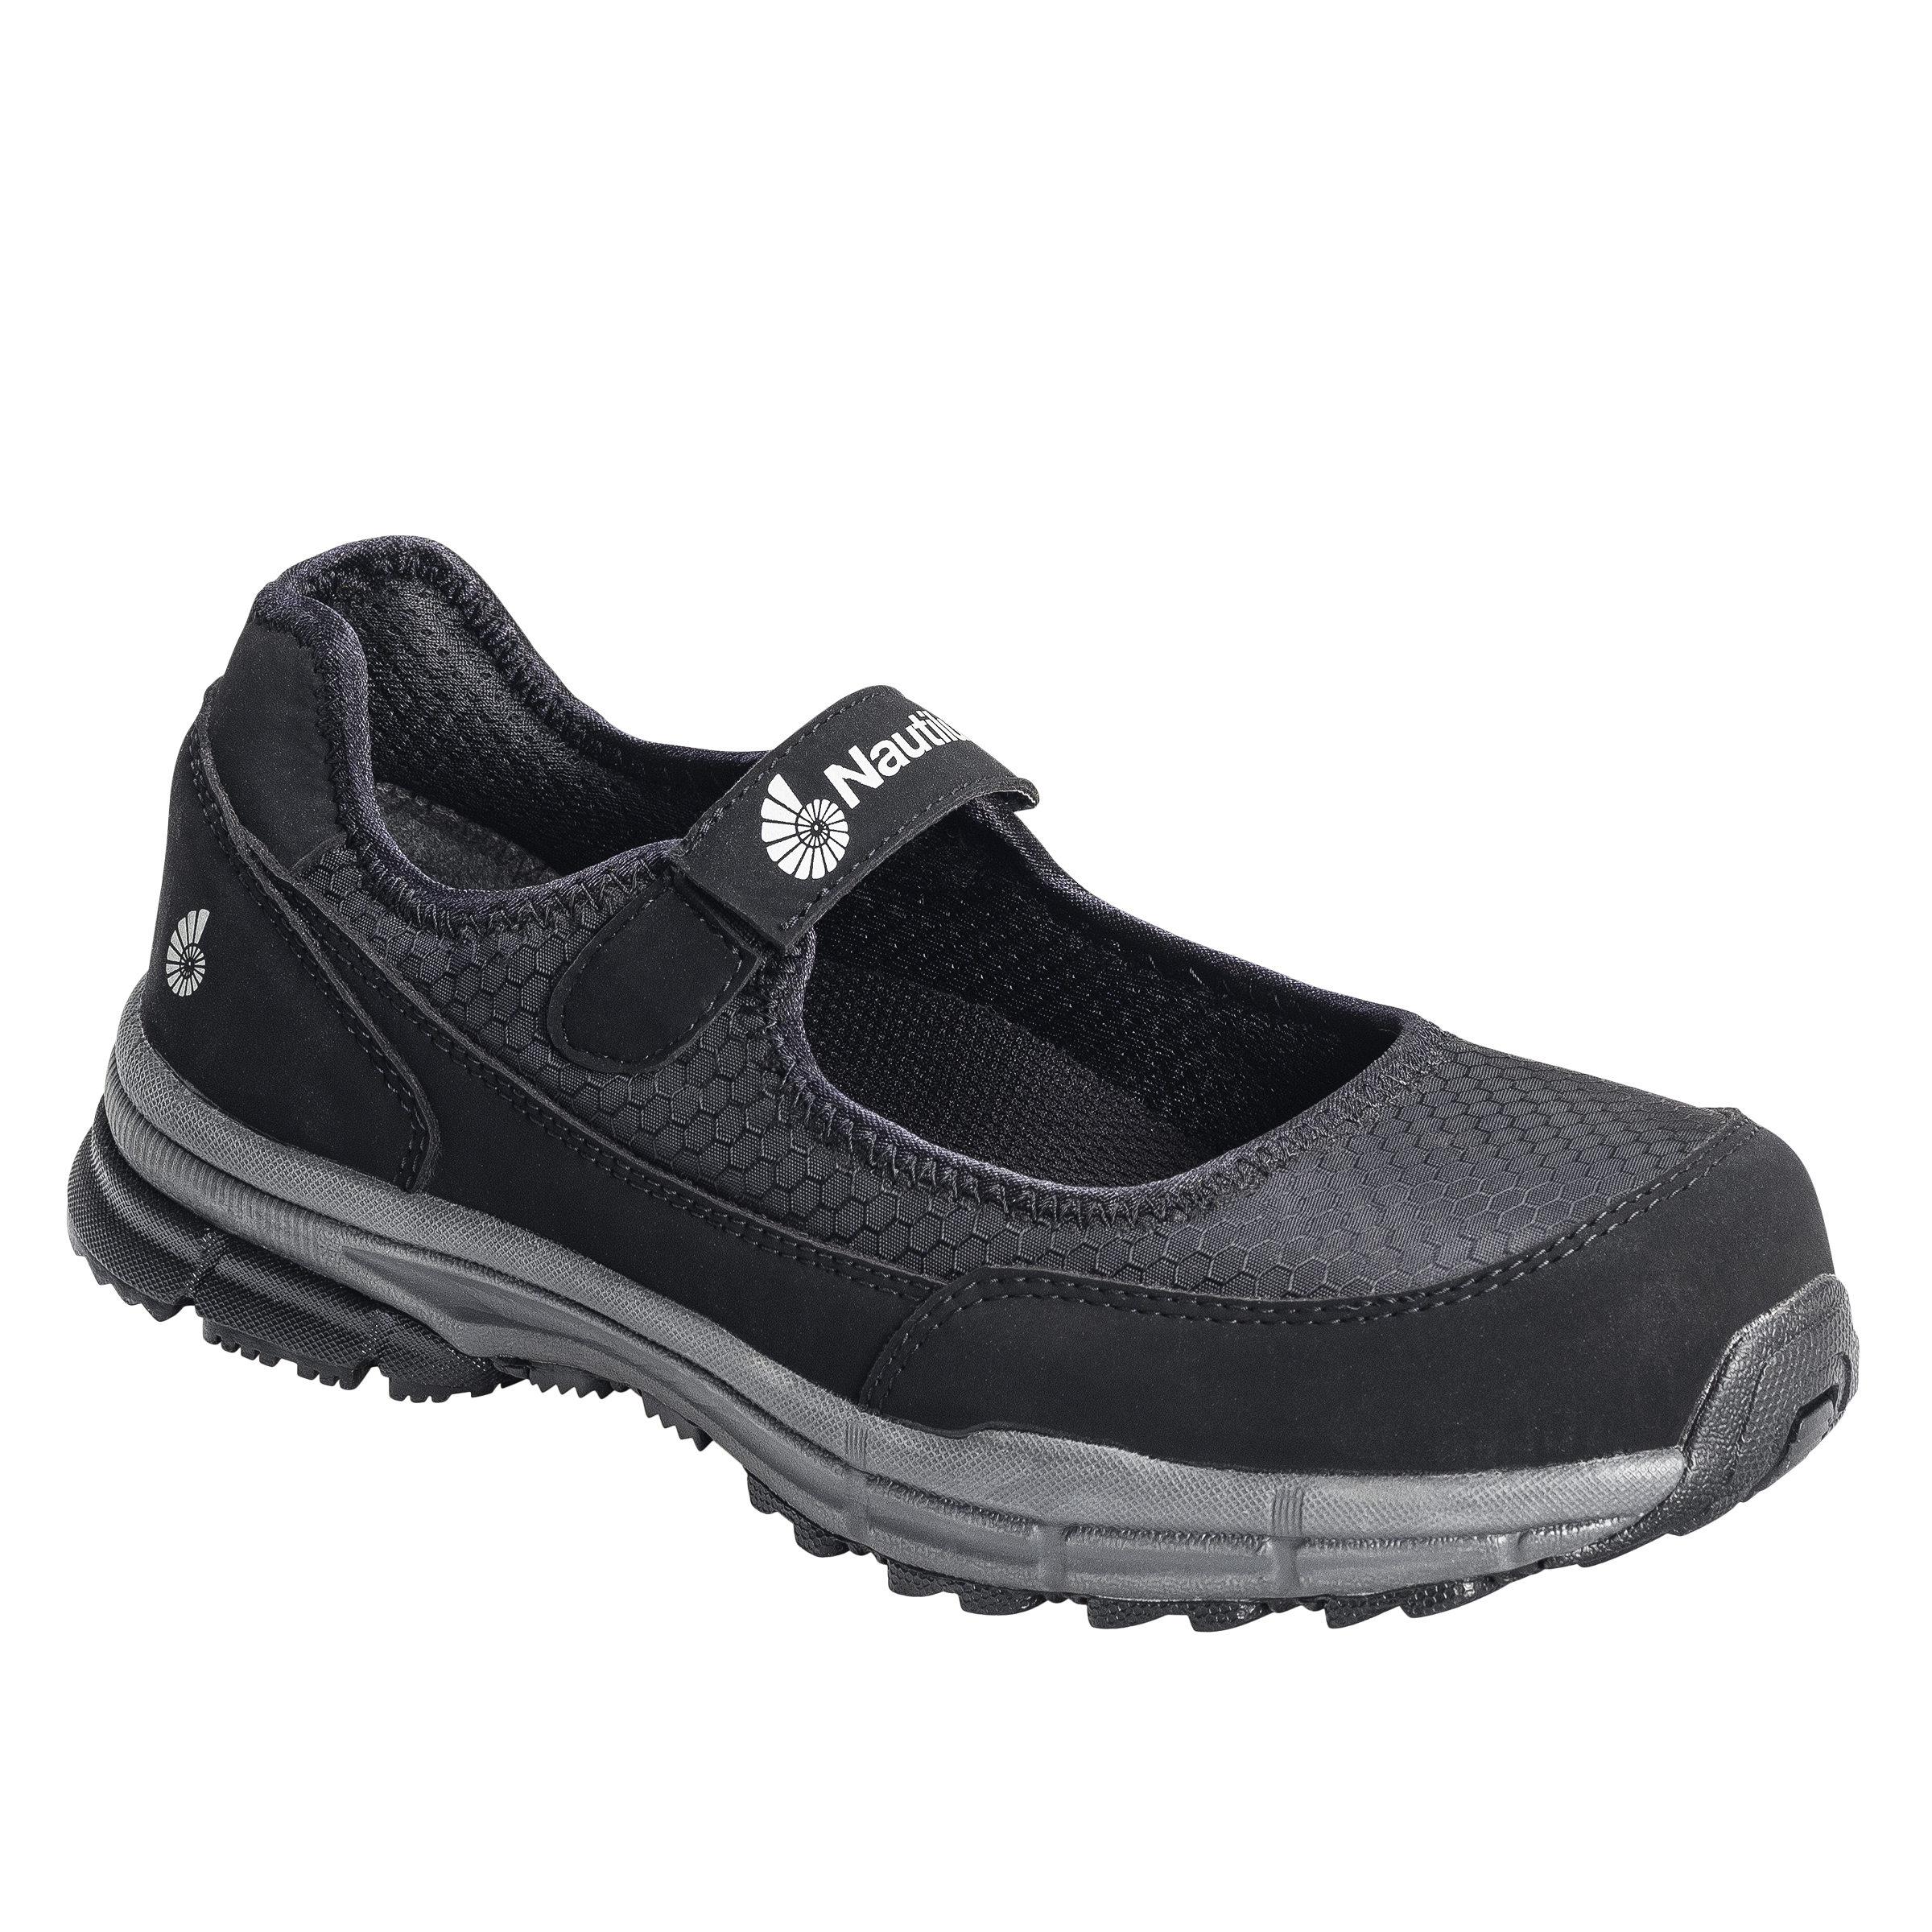 Nautilus Safety Footwear Women's Black Static Dissipating Soft Toe Mary Jane